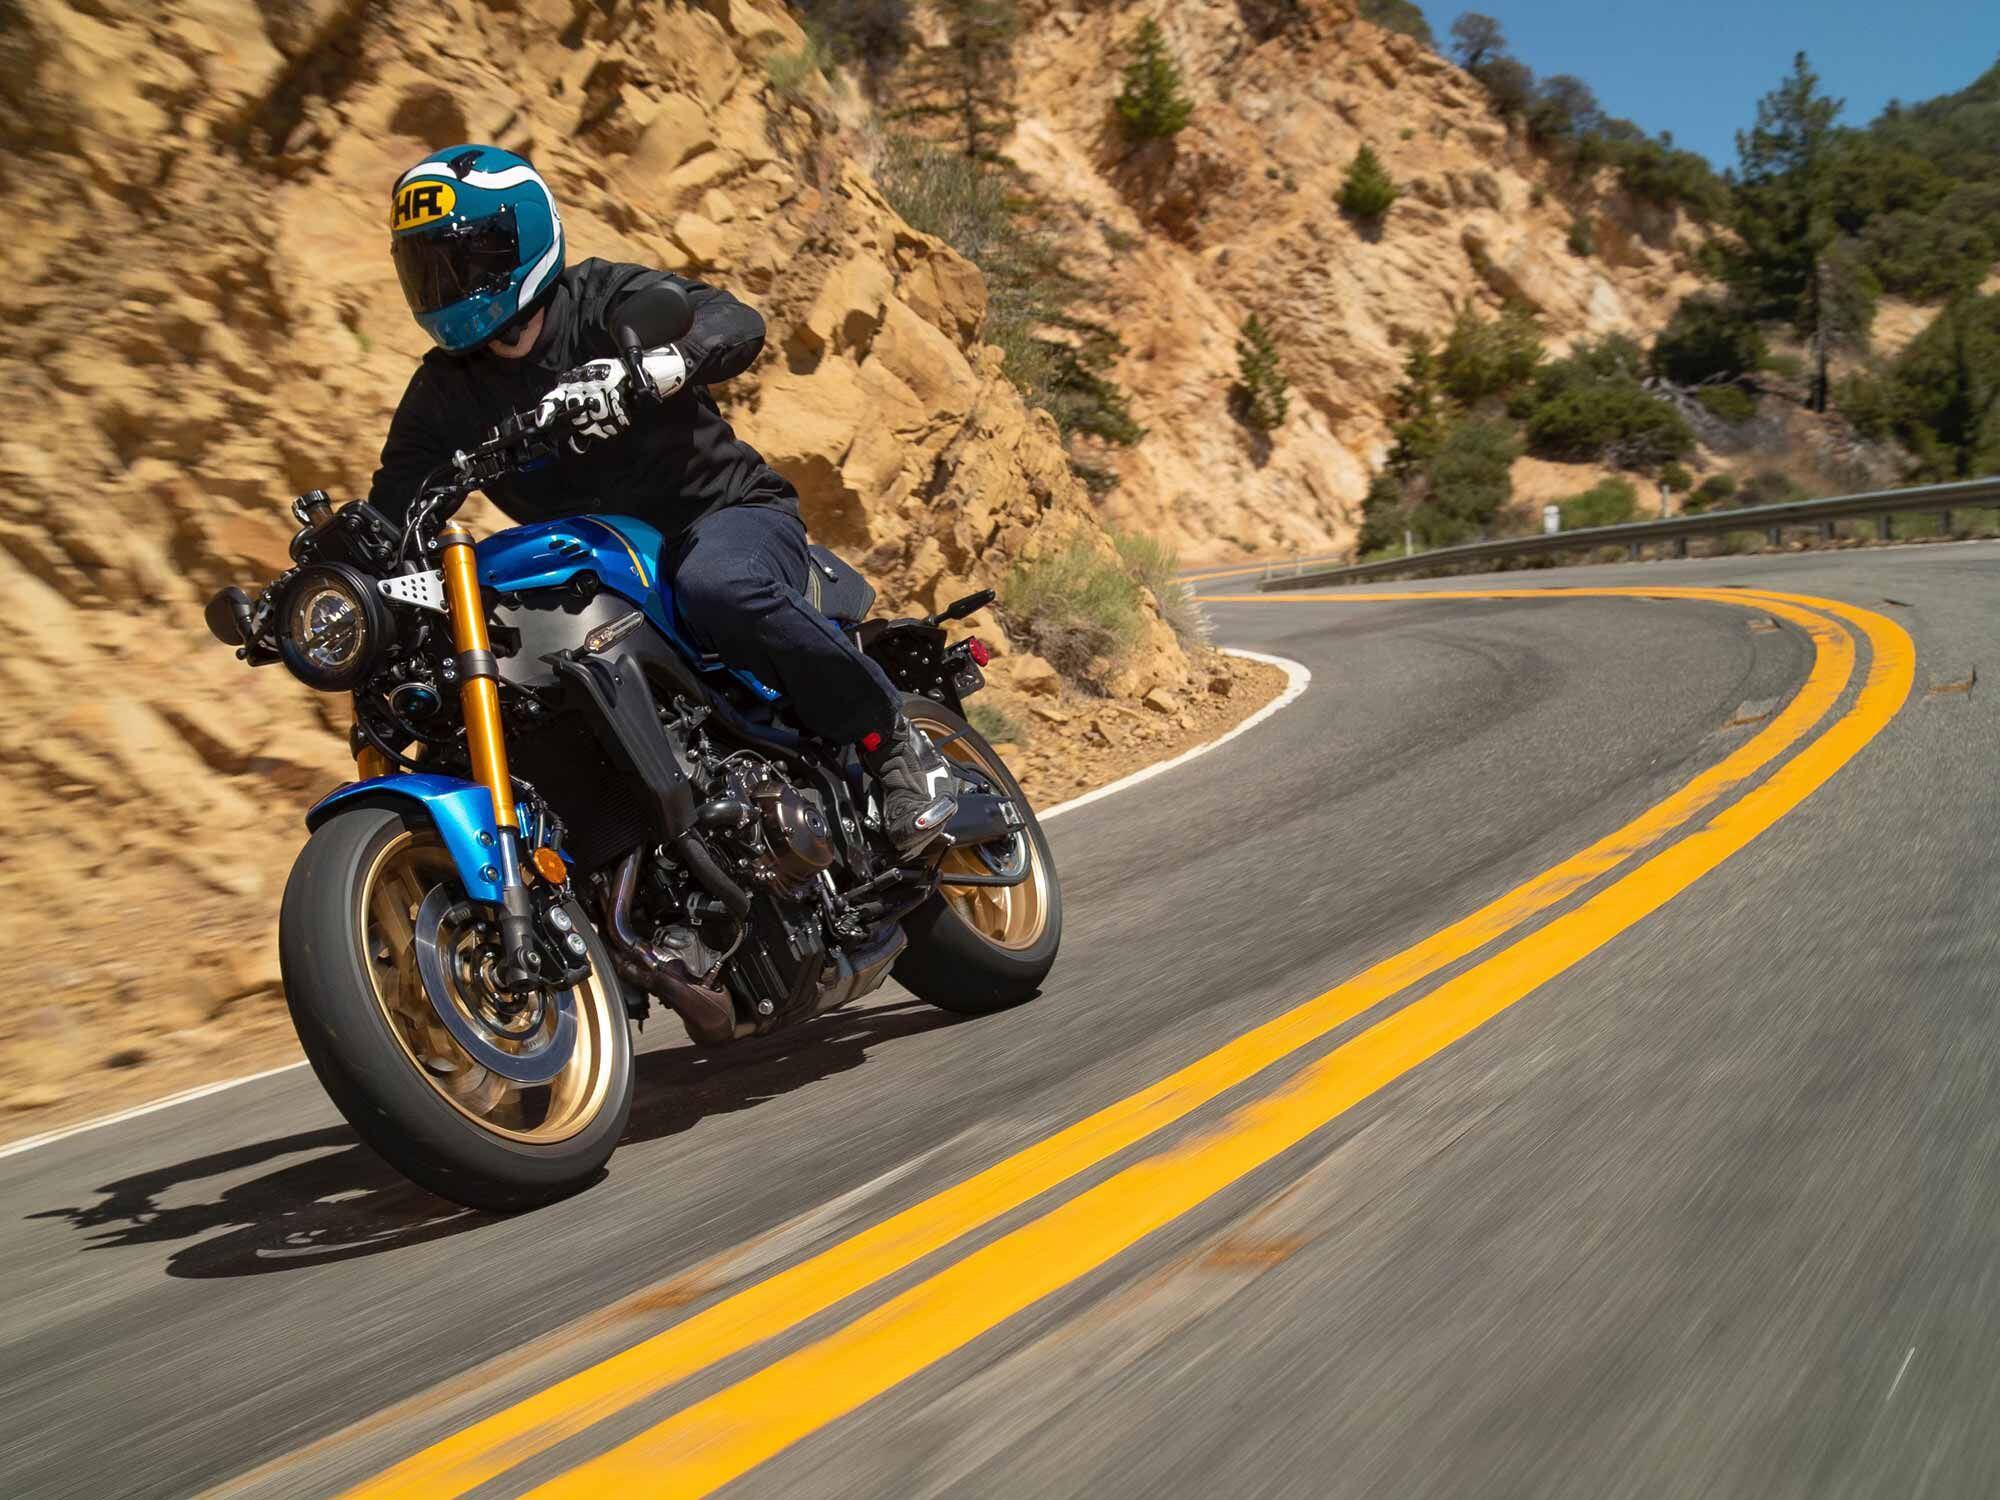 The 2022 Yamaha XSR900 looks right at home on any stretch of canyon road.